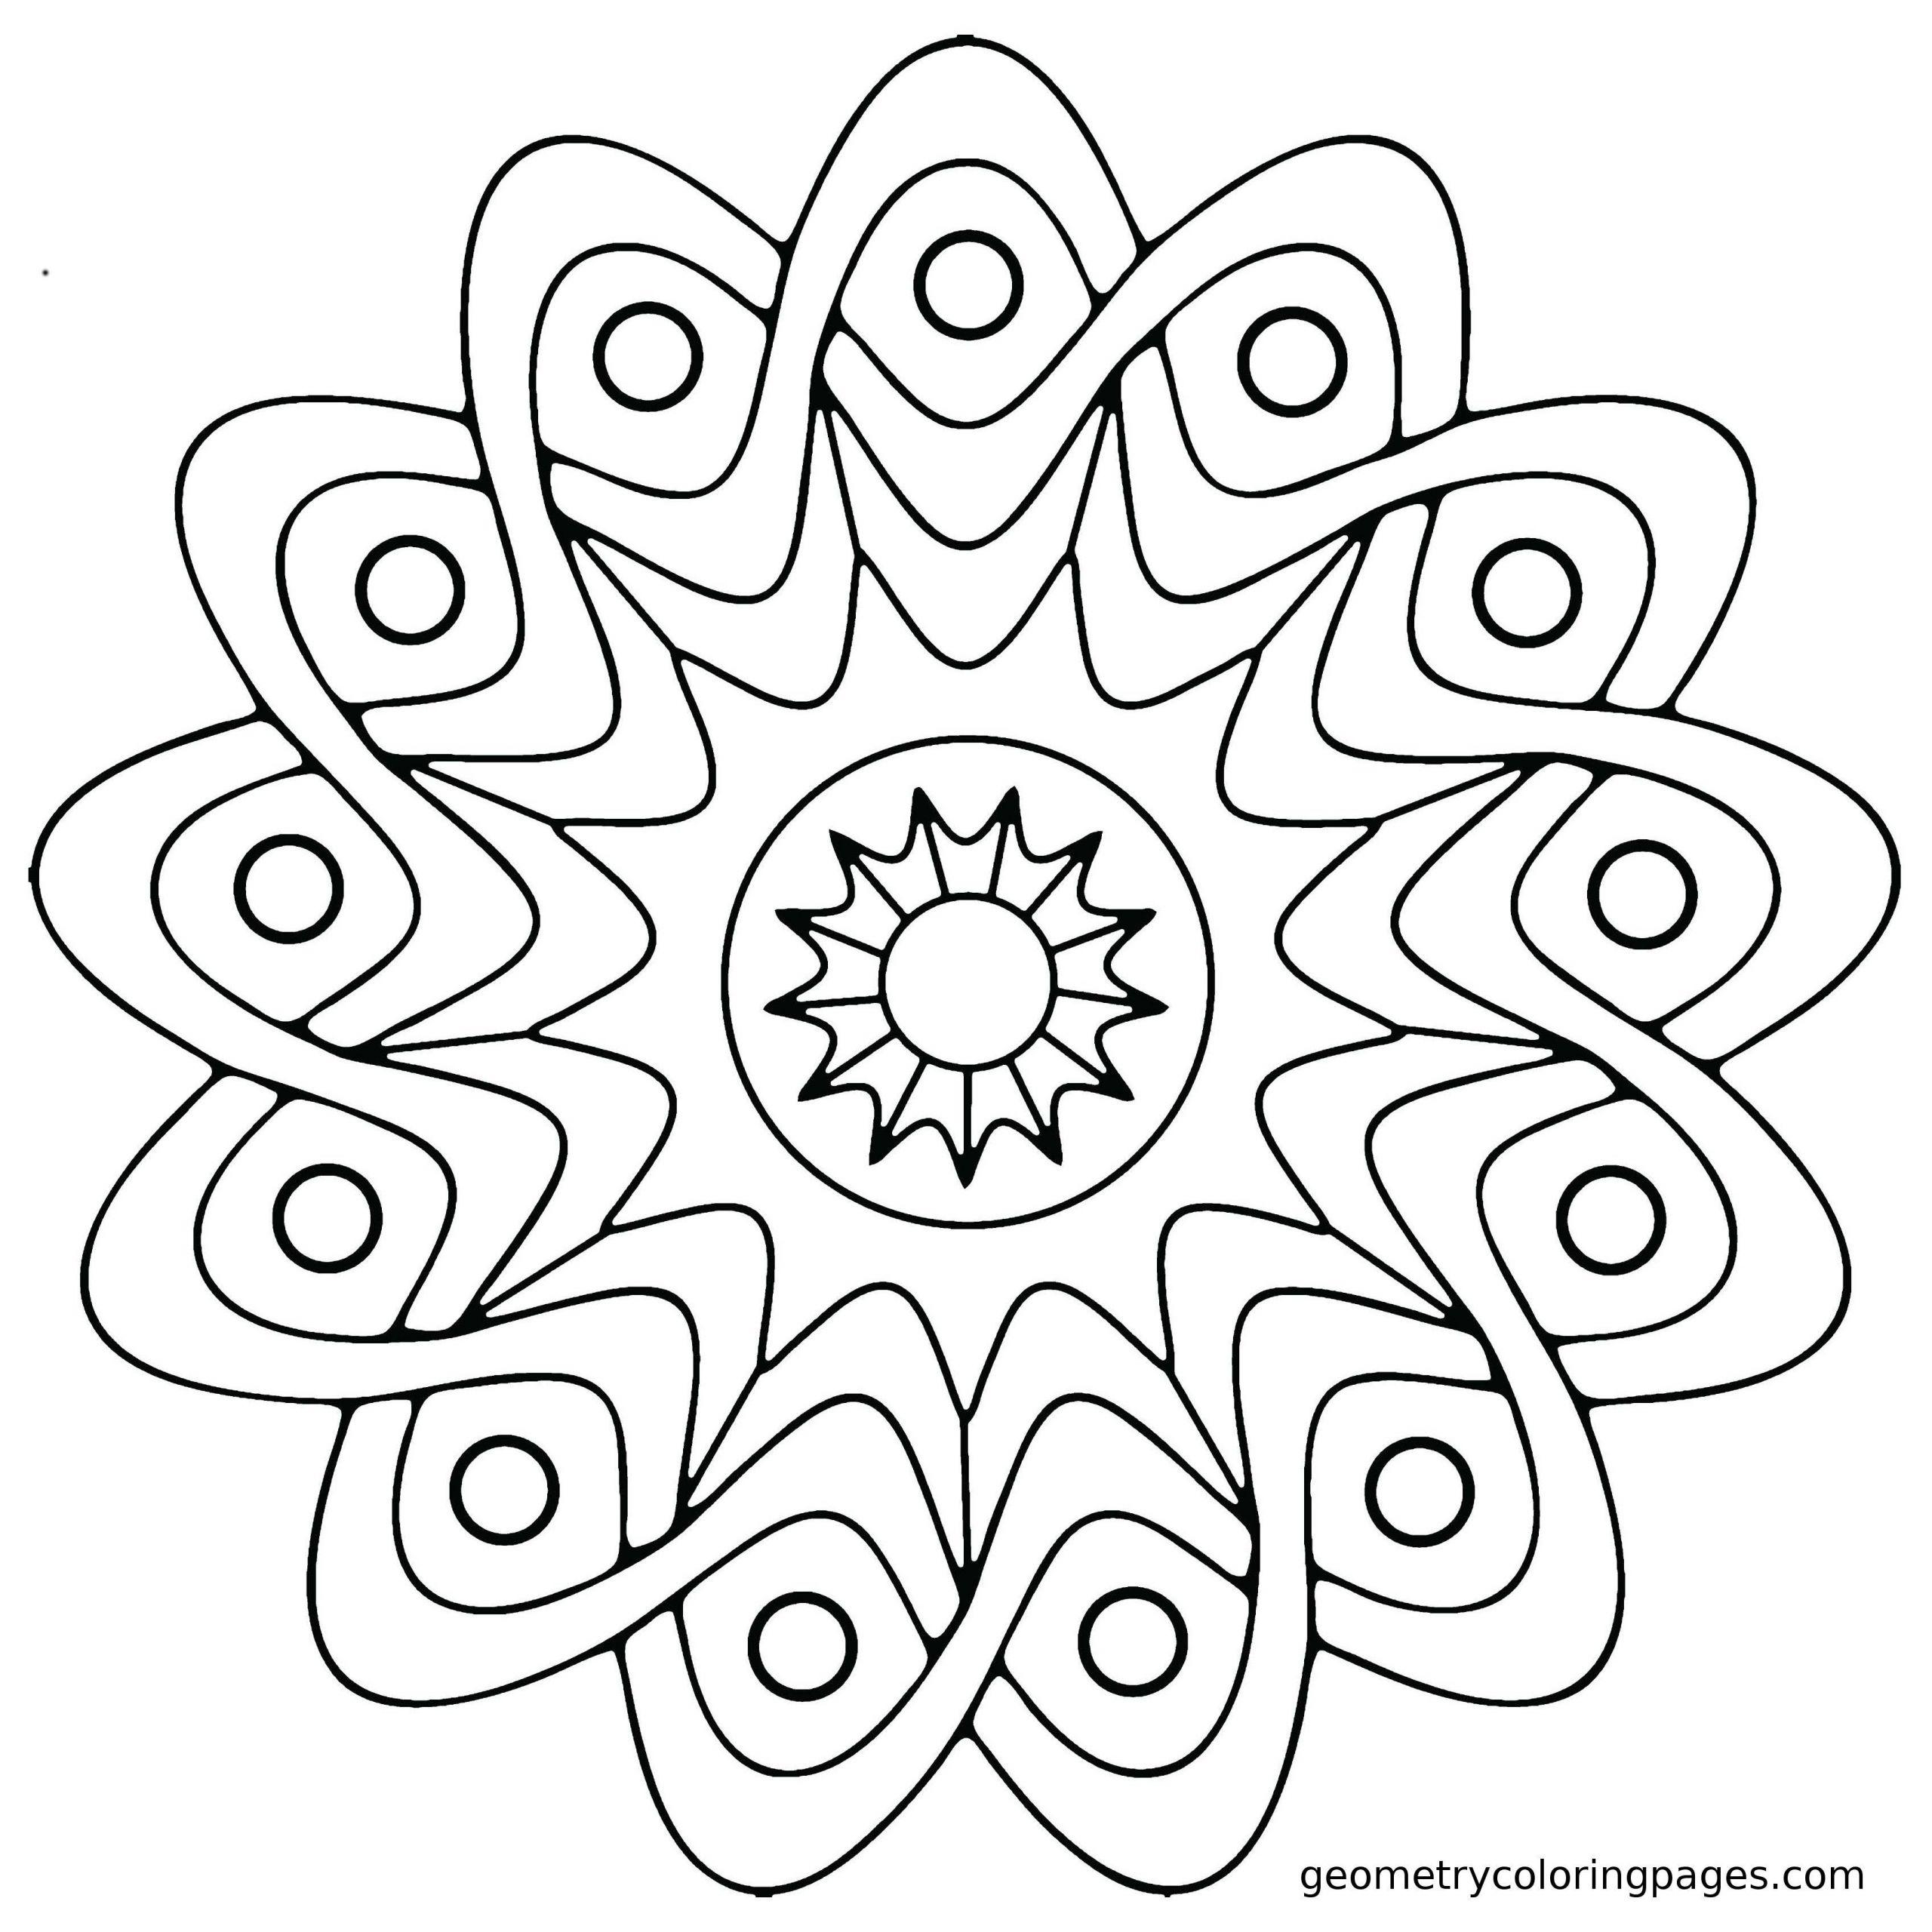 Easy Adult Coloring Pages
 Mandala Coloring Pages Easy Mandala Coloring Pages